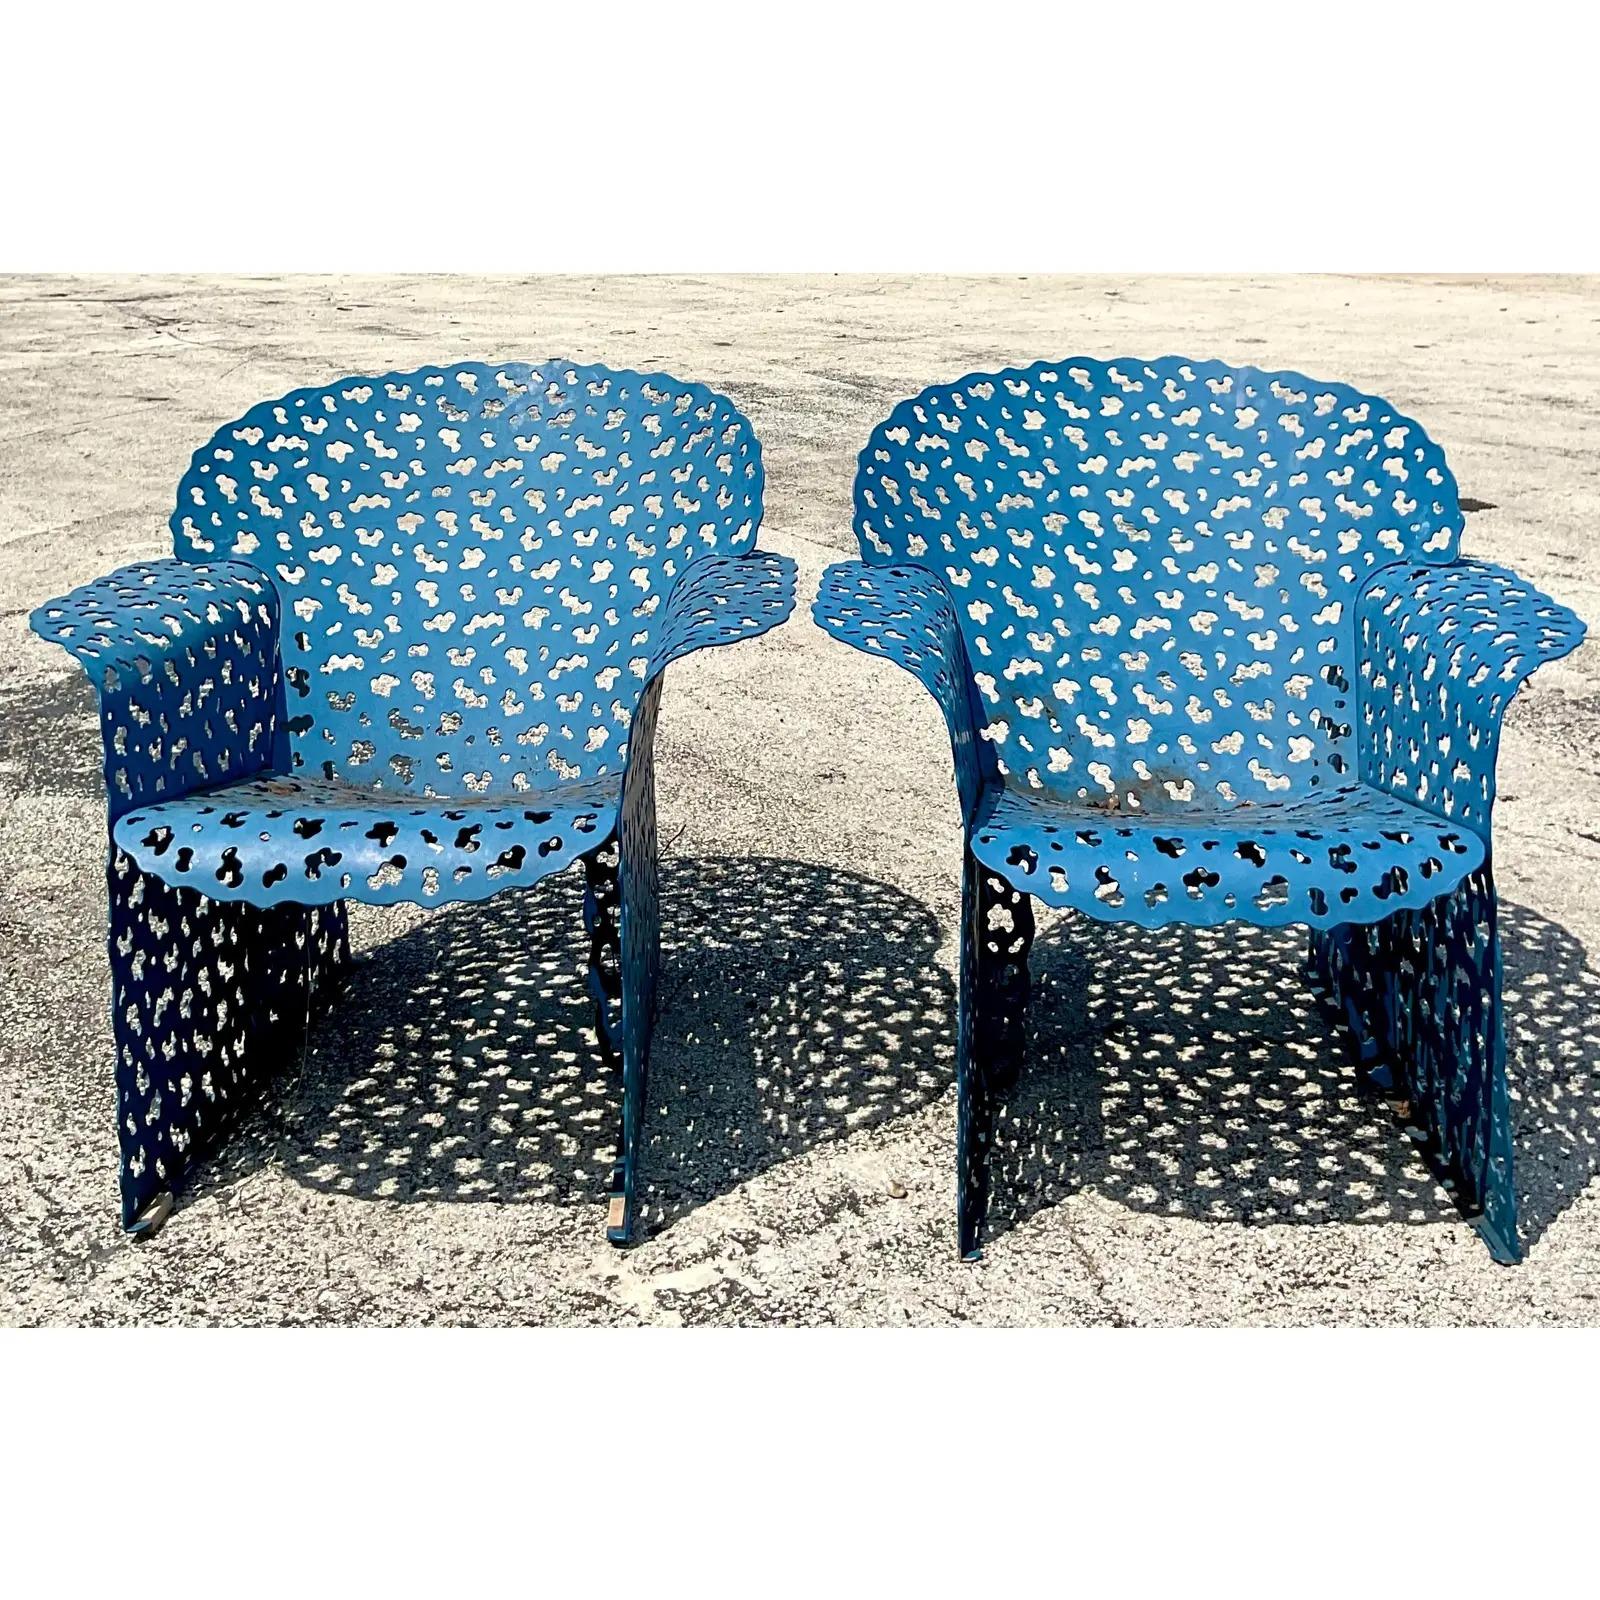 North American Vintage Contemporary Richard Shultz for Knoll Aluminum Topiary Lounge Chairs 